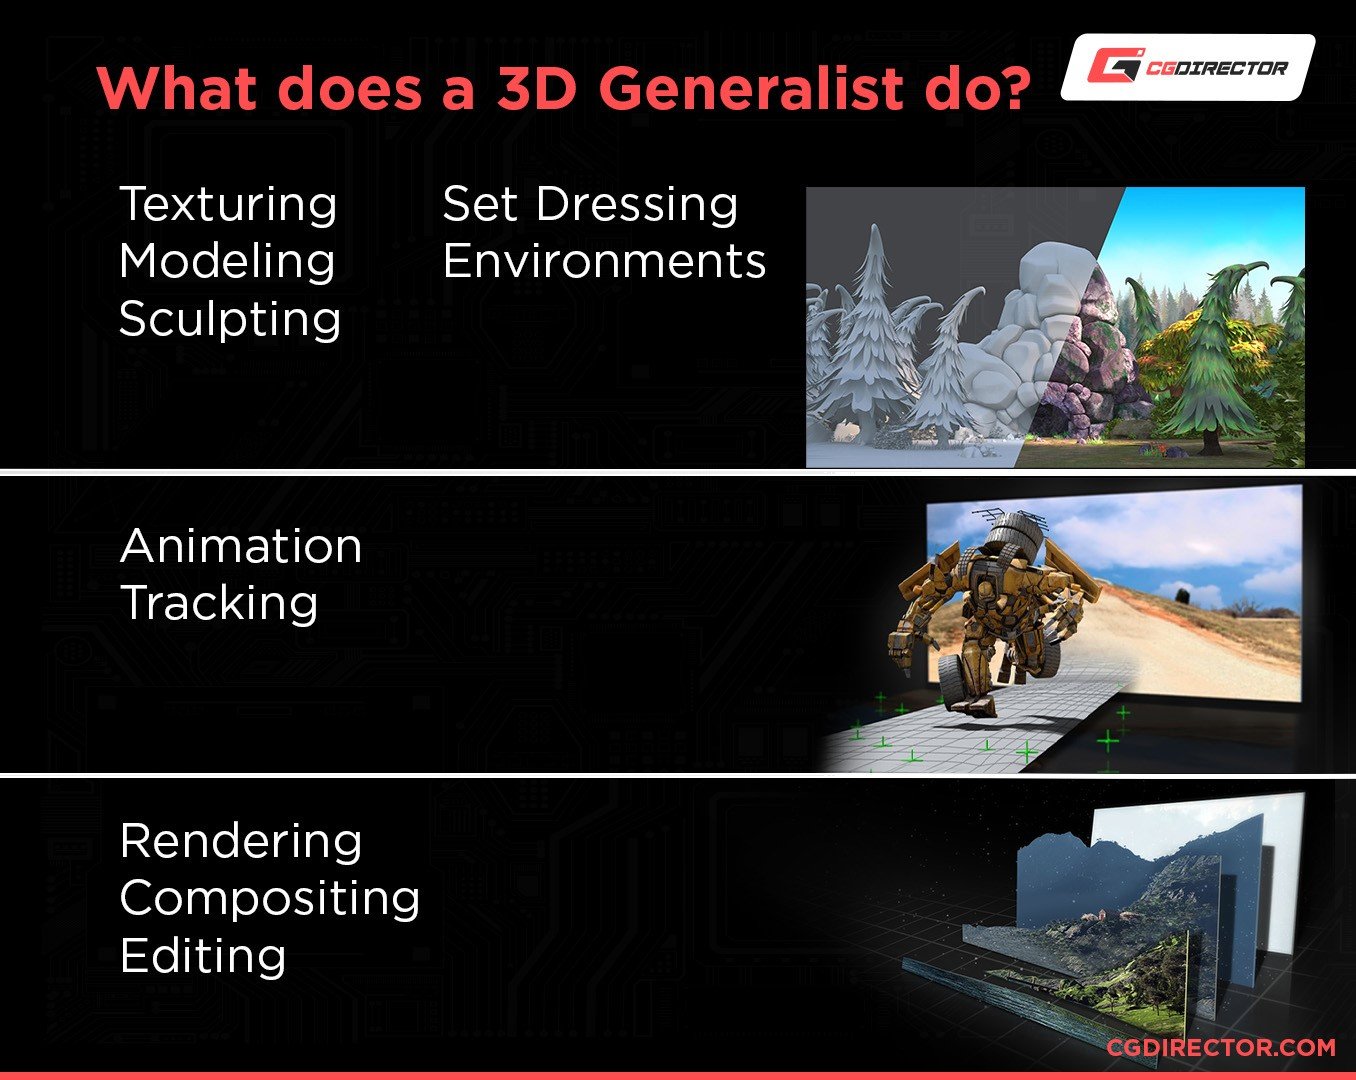 What does a 3D Generalist do